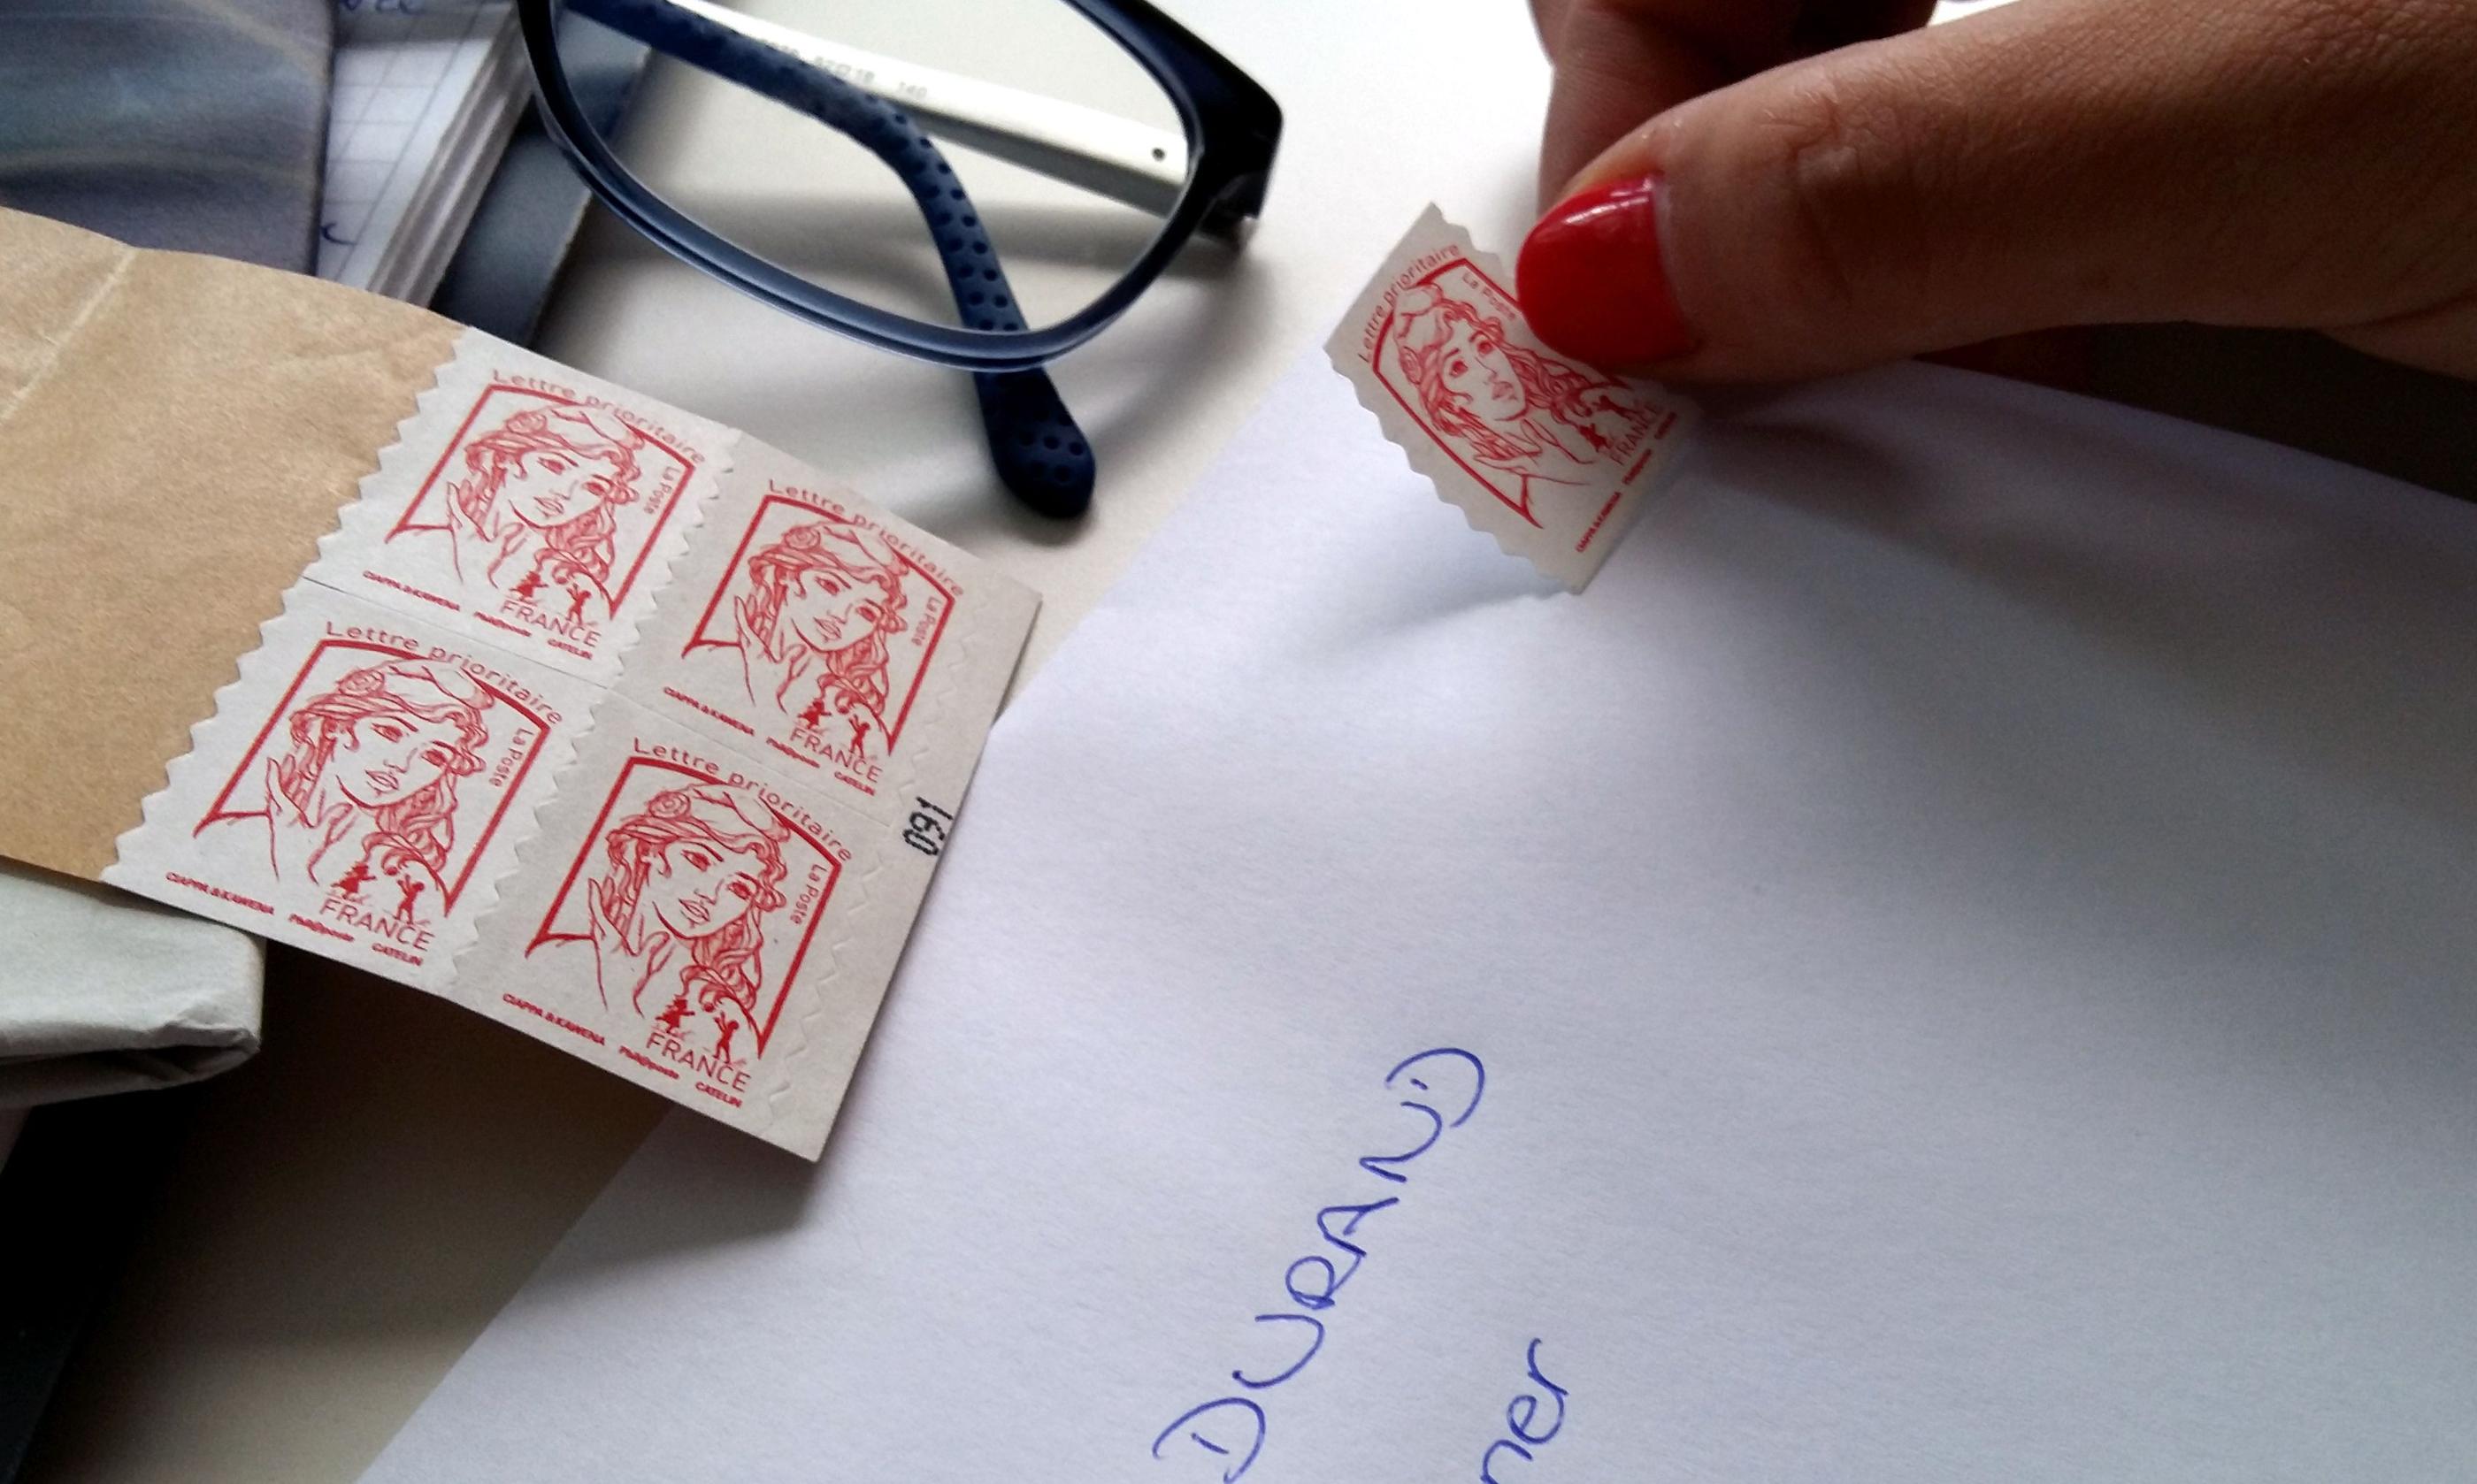 Timbres - Achat Timbres - La Poste